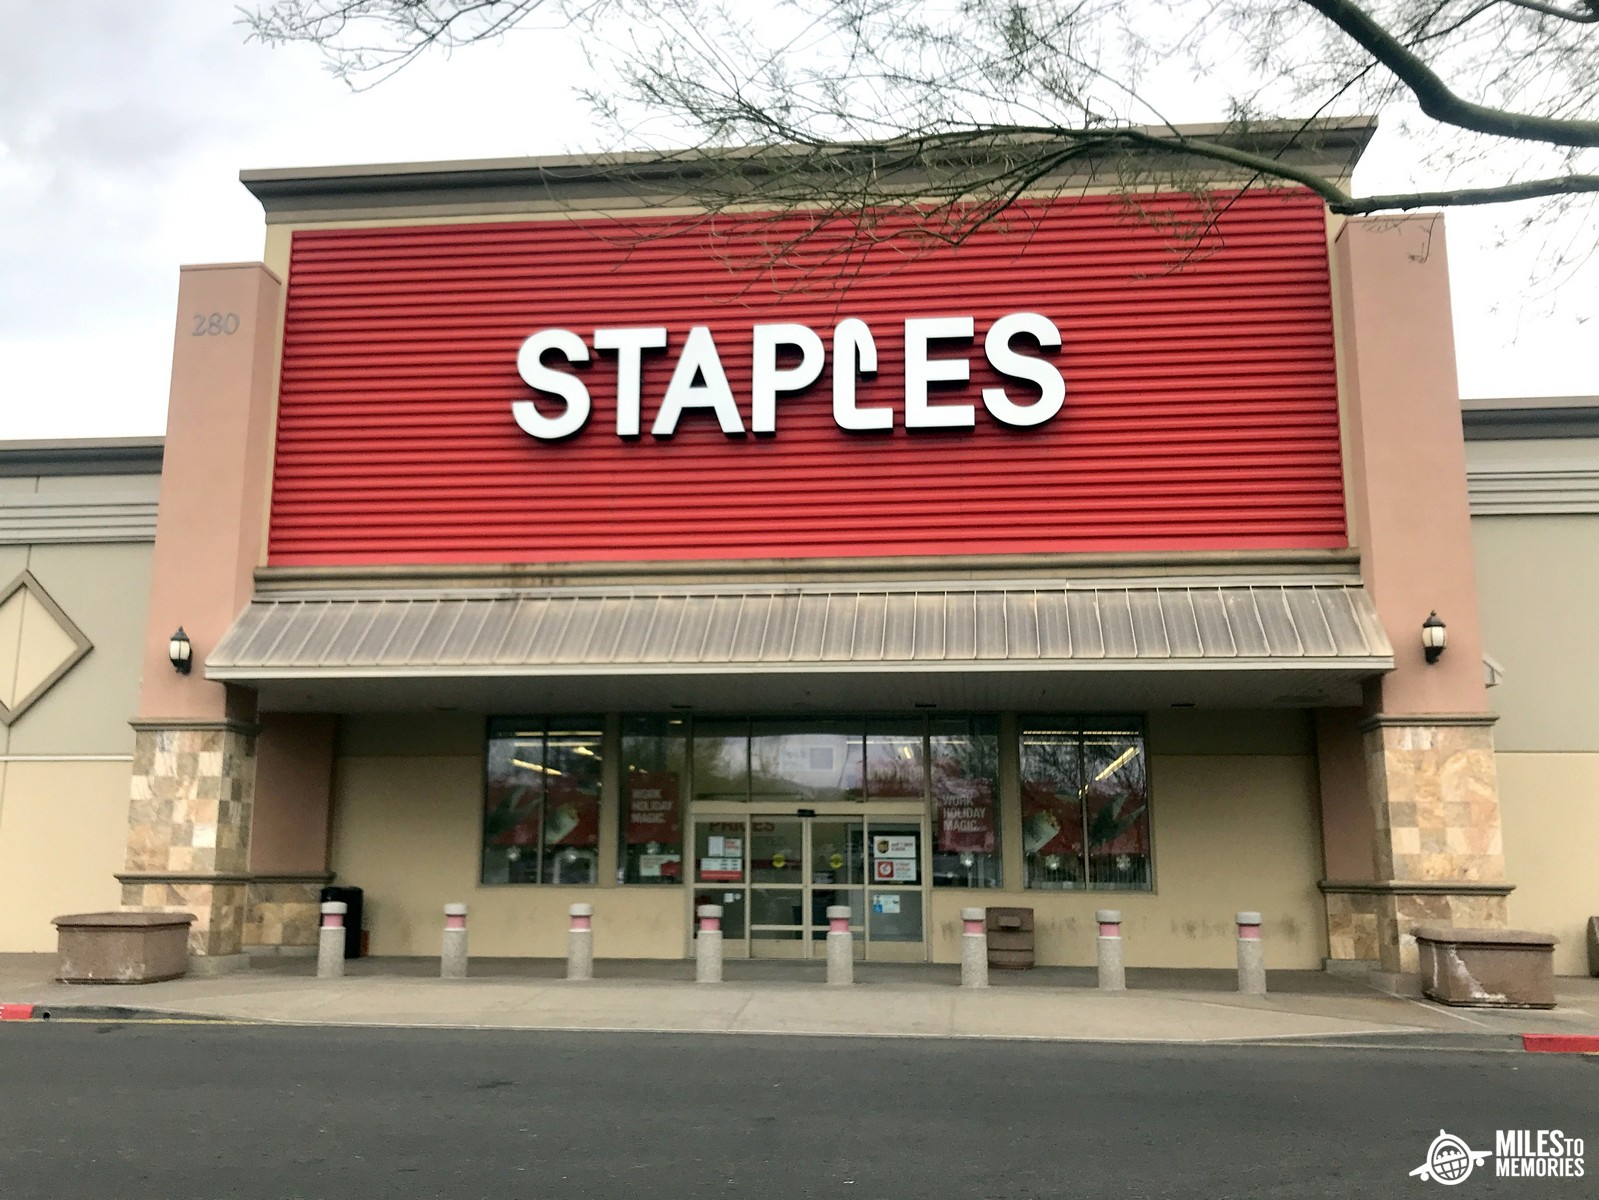 Staples Mastercard Gift Card Deal